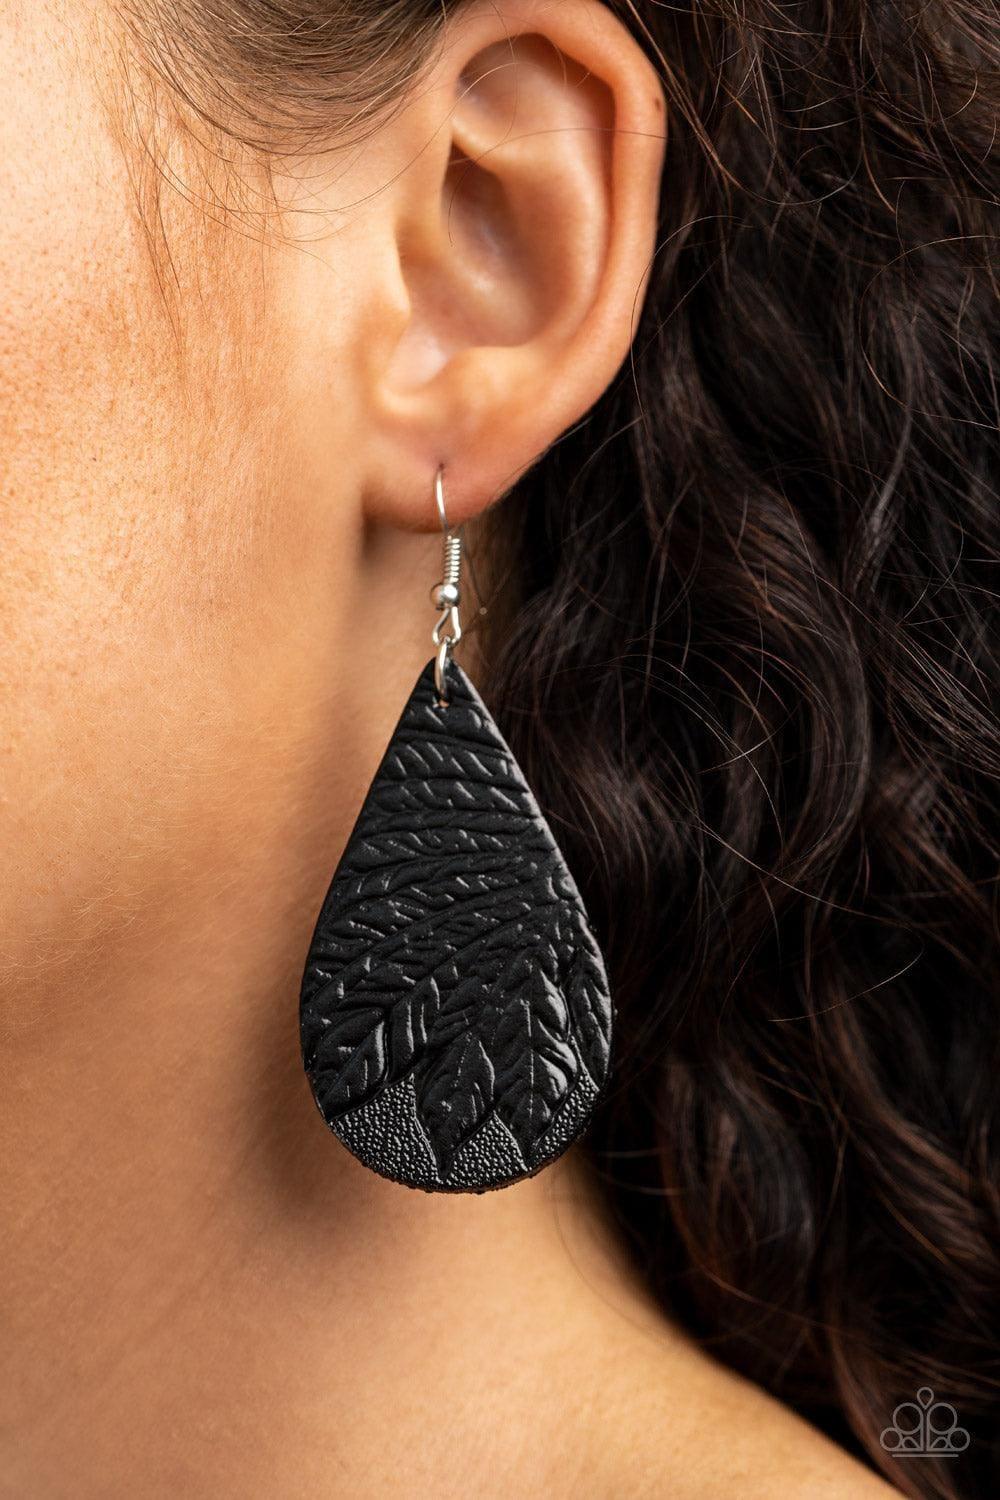 Paparazzi Accessories - Everyone Remain Palm! - Black Earrings - Bling by JessieK